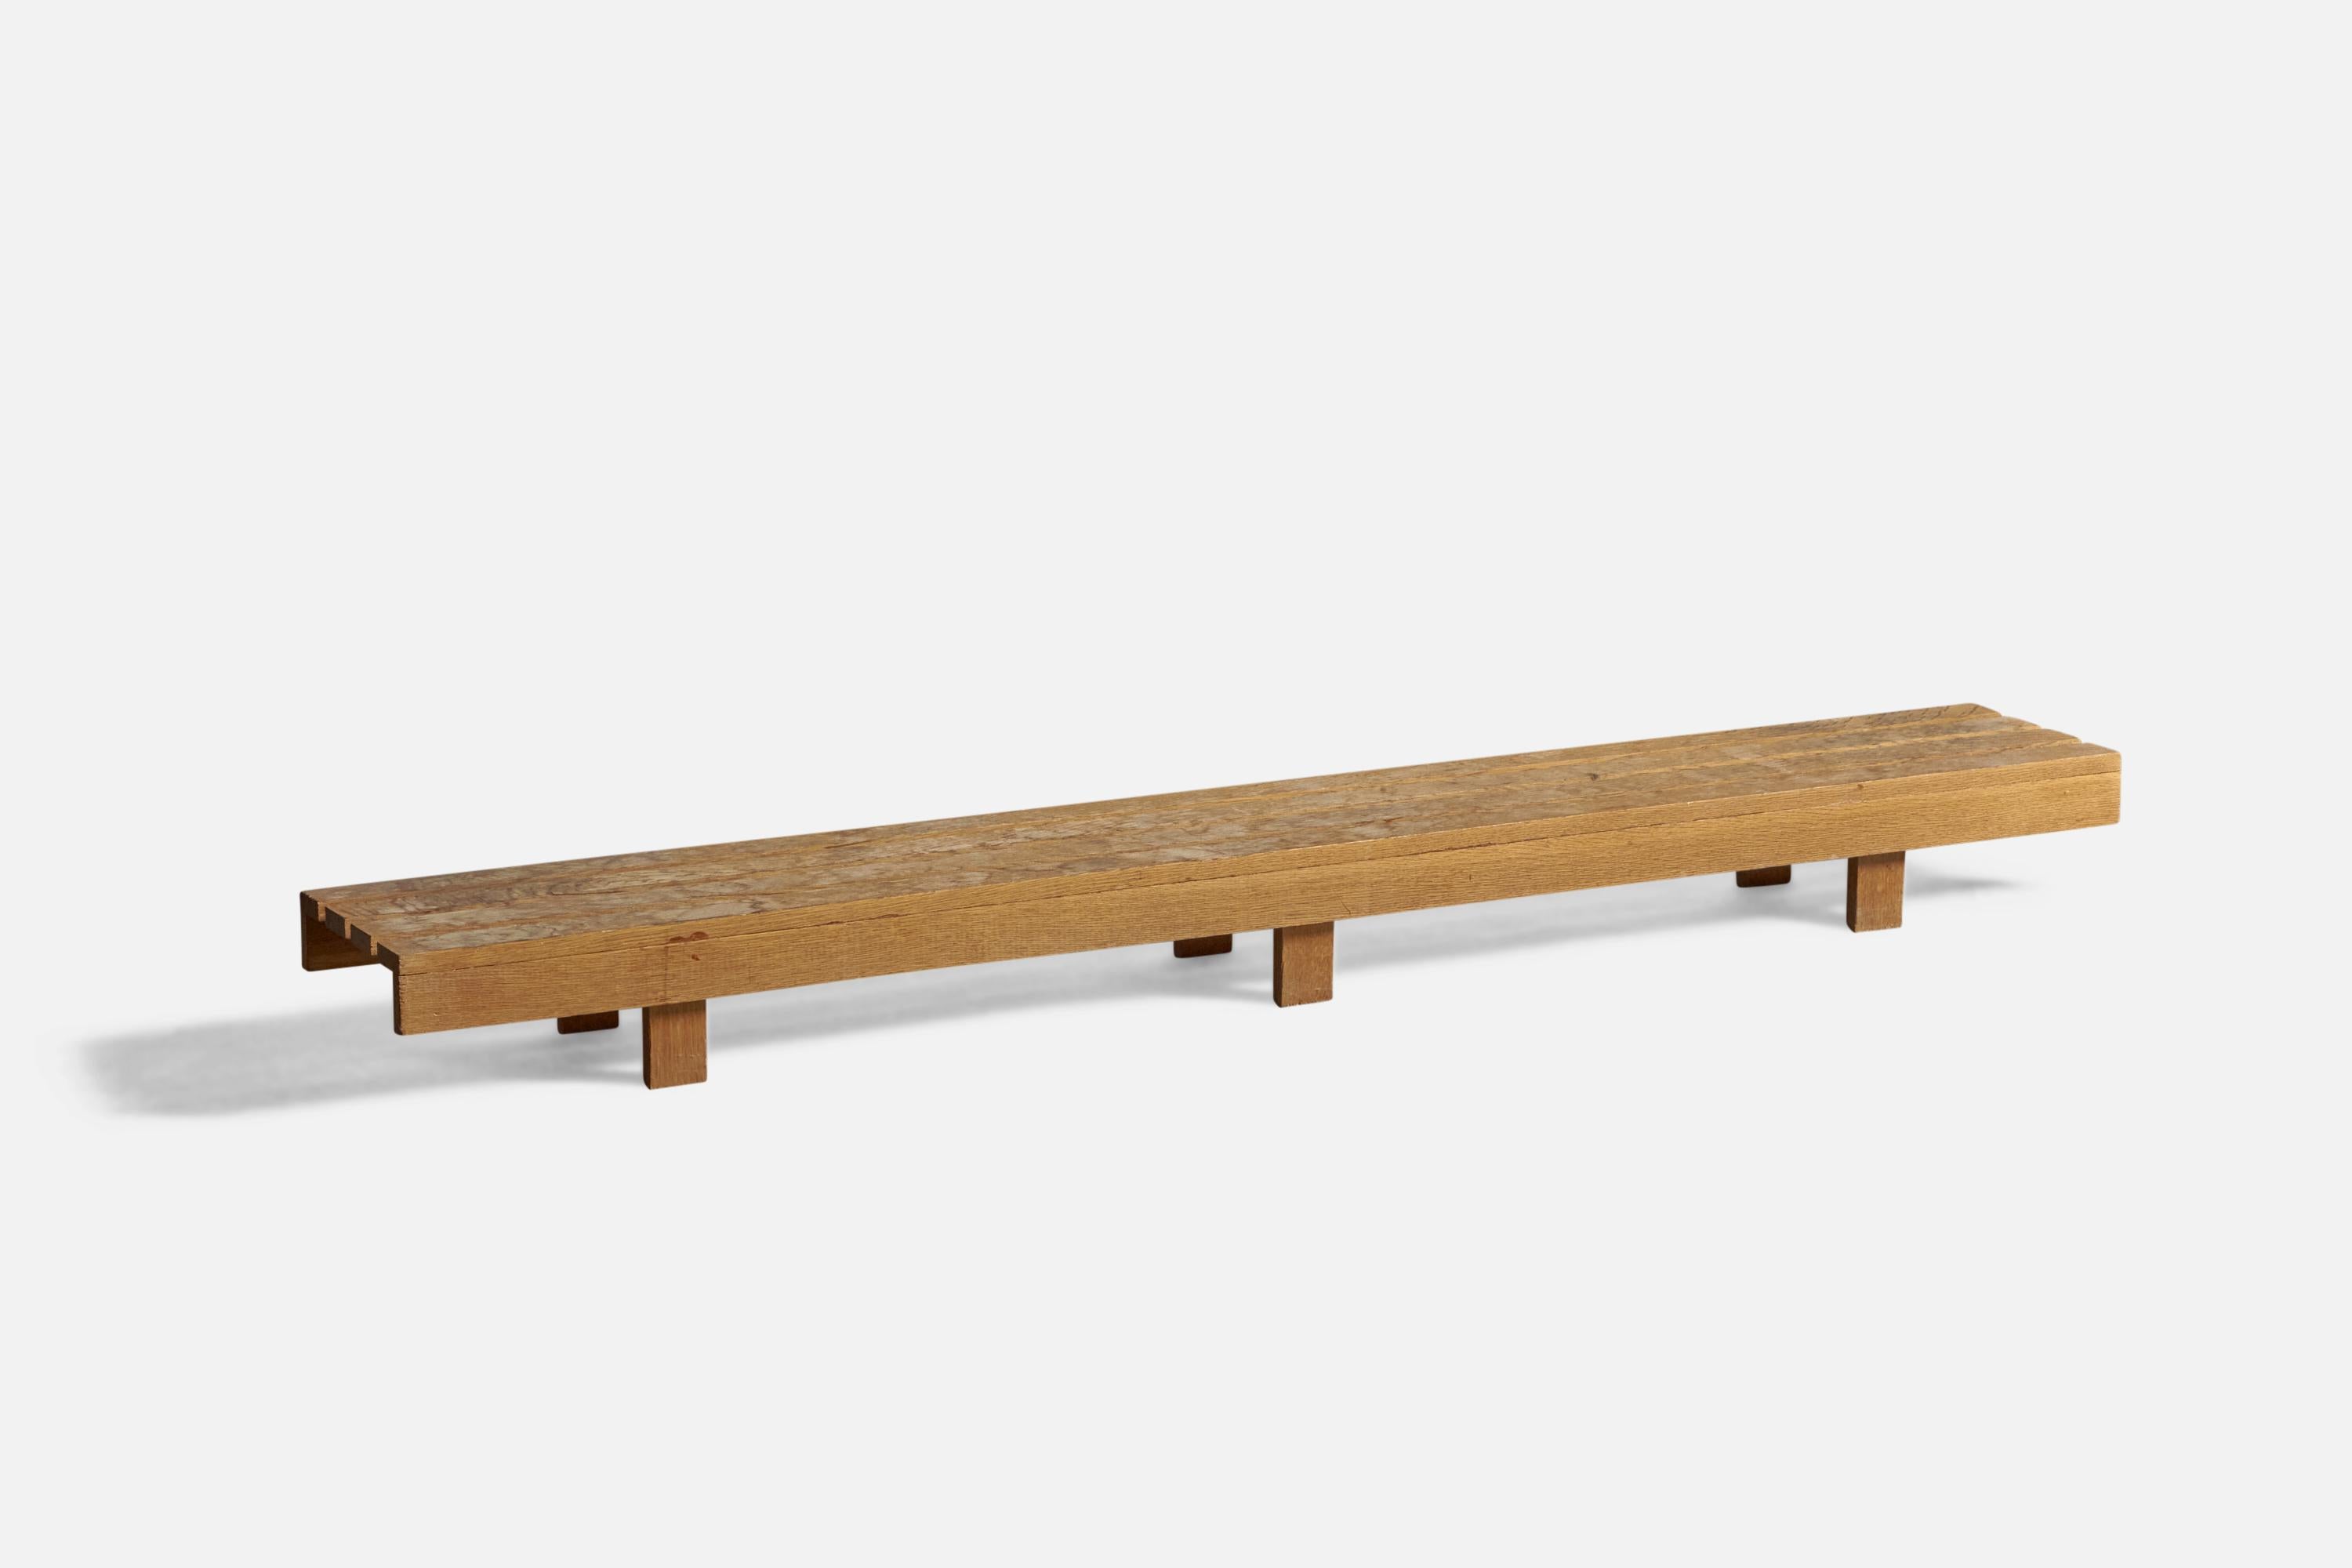 A low pine bench, designed and produced in Sweden, c. 1970s.